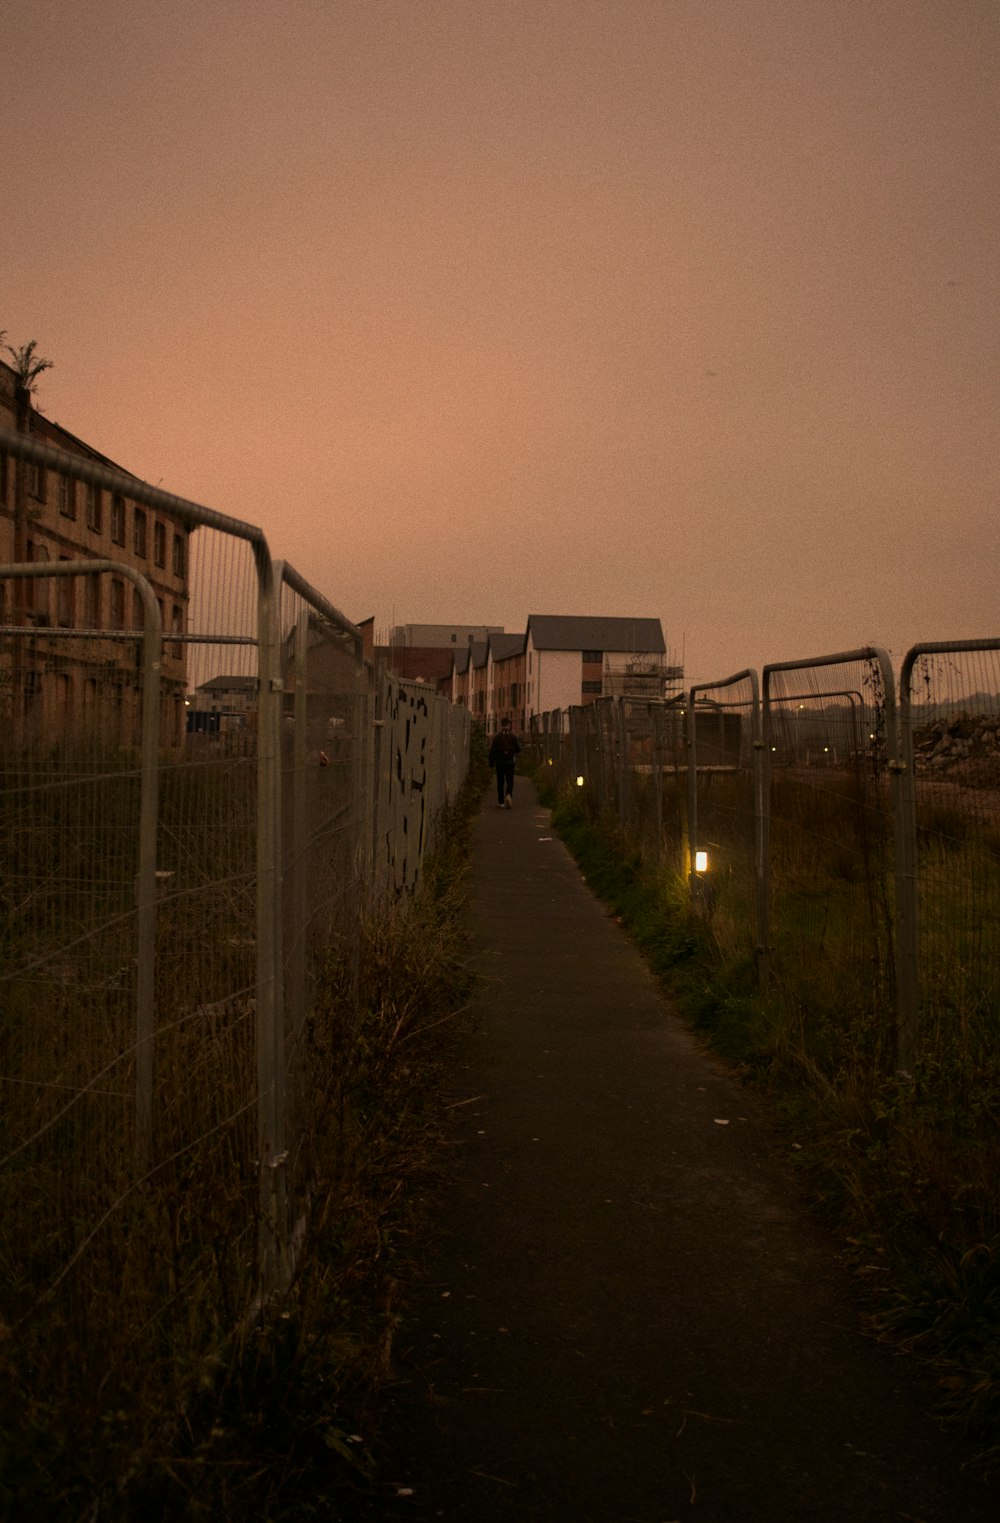 a person walking on a path next to a fence and a building